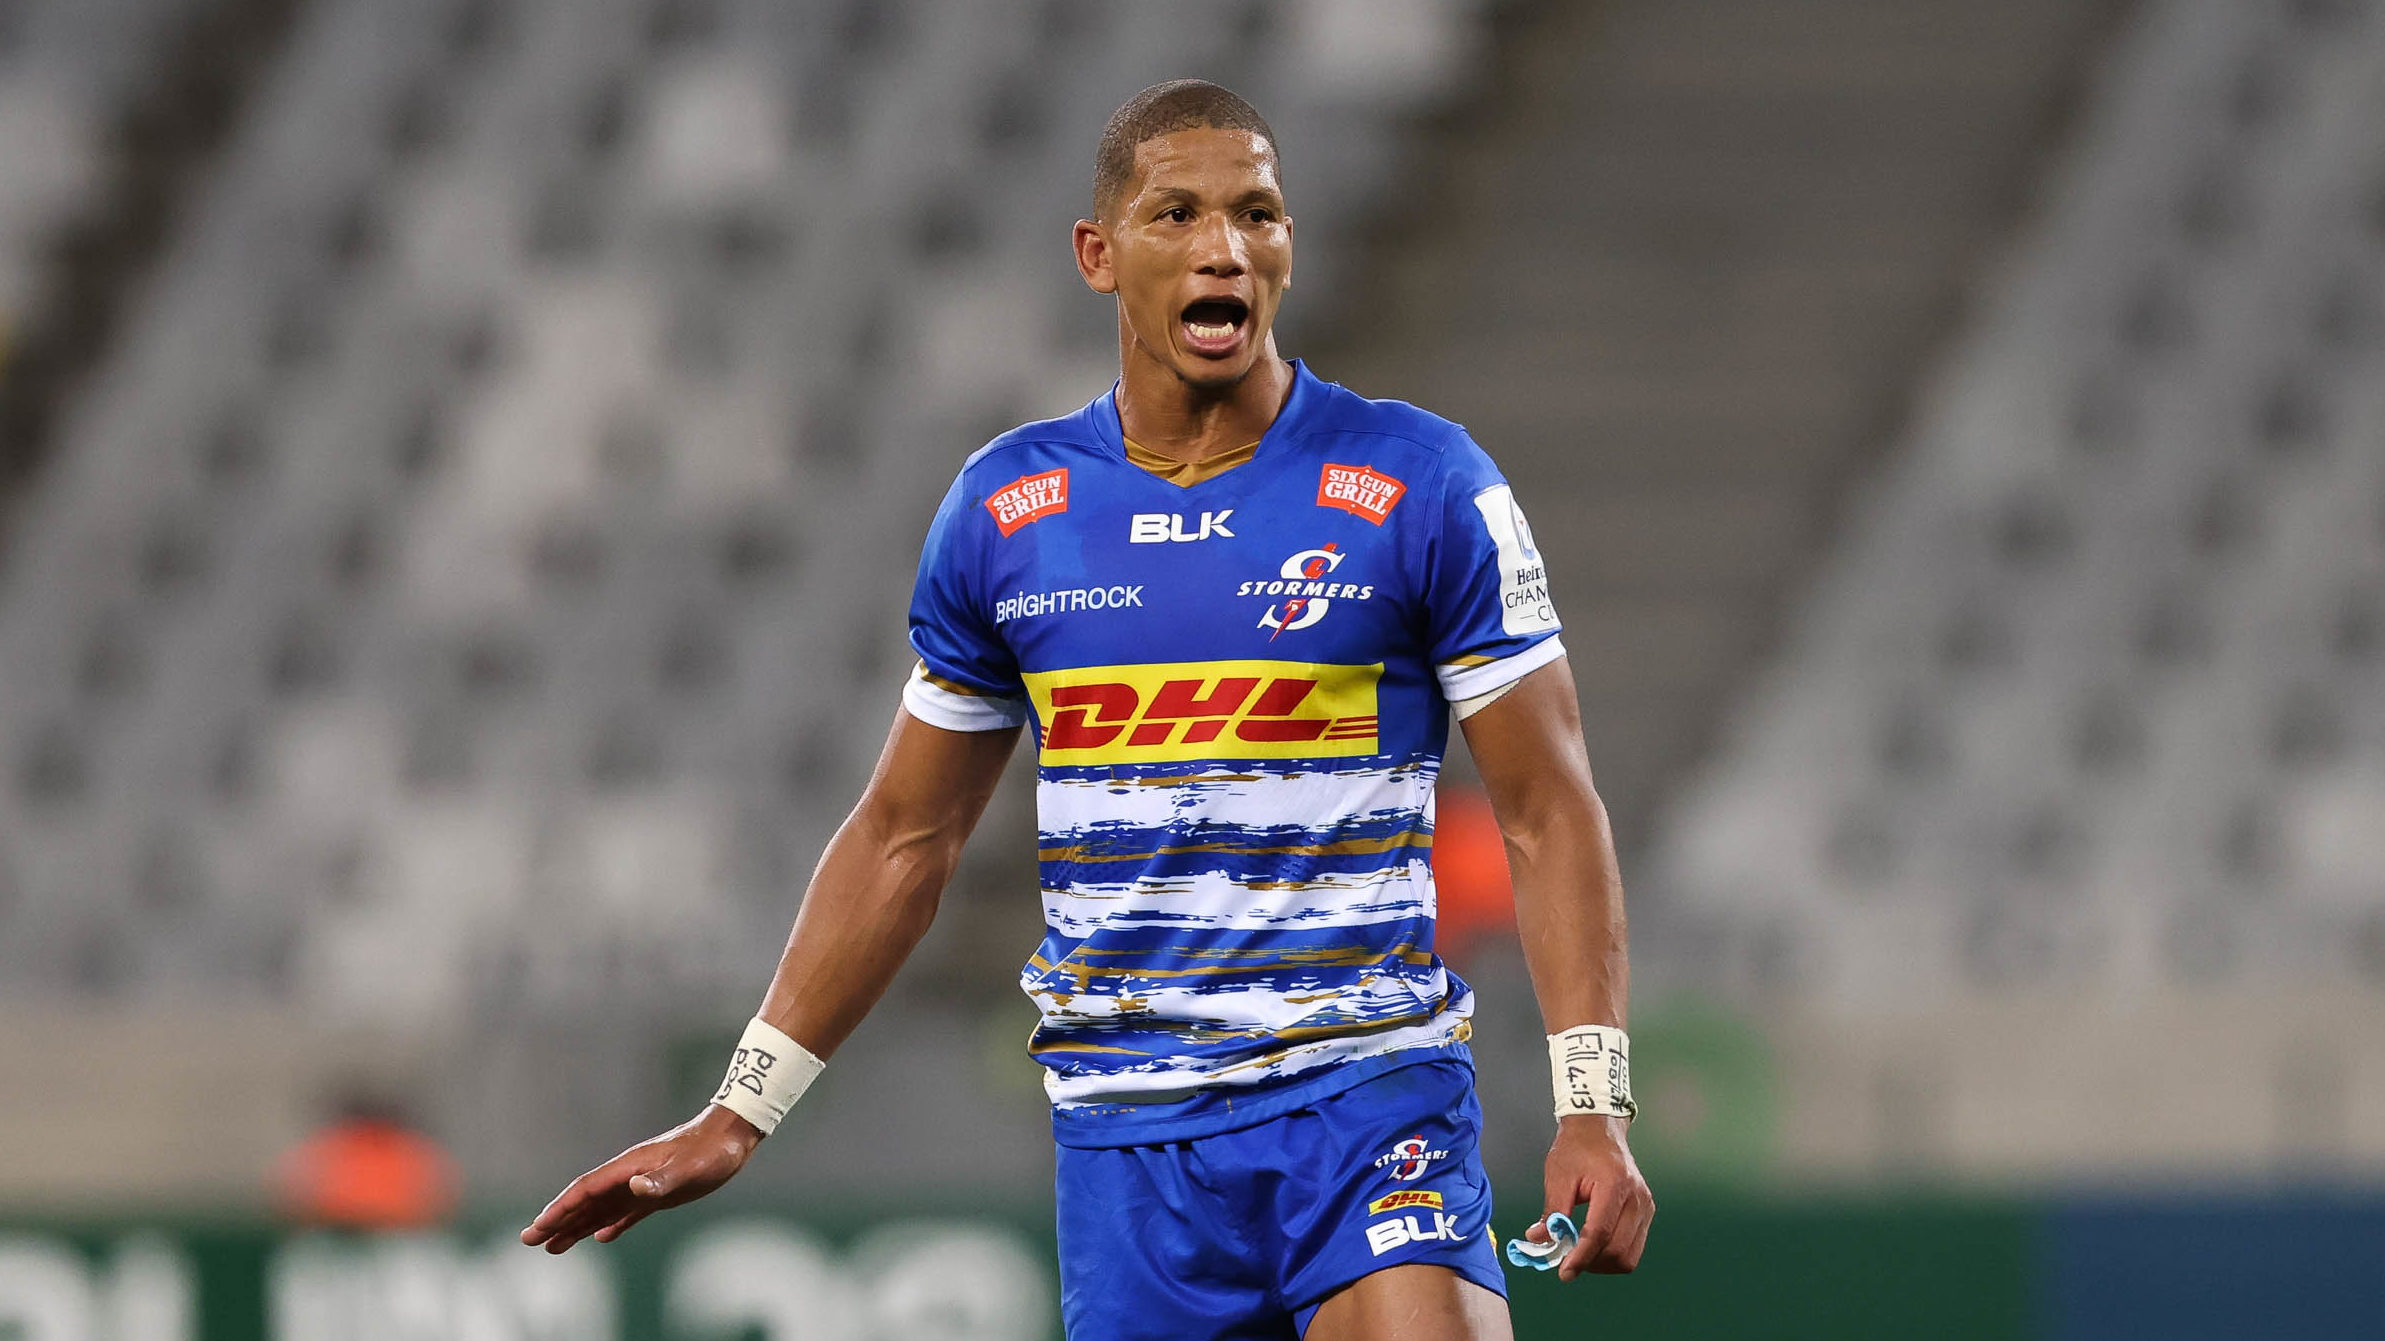 CAPE TOWN, SOUTH AFRICA - APRIL 01: Manie Libbok of the DHL Stormers during the Heineken Champions Cup, pool match between DHL Stormers and London Irish at DHL Stadium on December 17, 2022 in Cape Town, South Africa. (Photo by EJ Langner/Gallo Images)